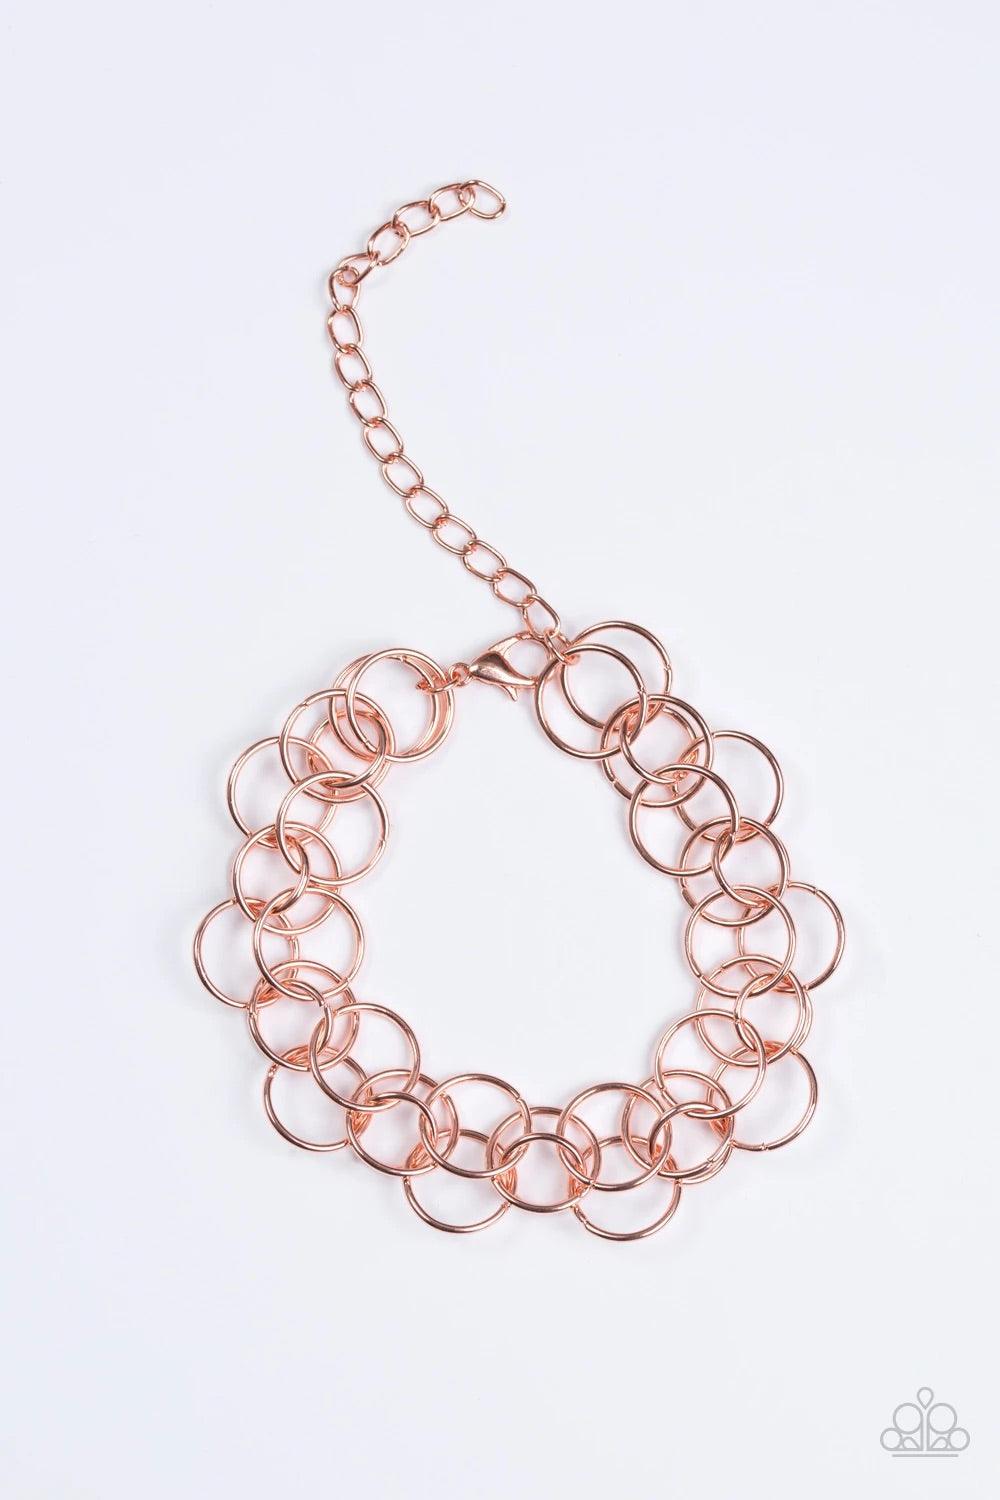 Paparazzi Accessories Contemporary Circus - Copper Varying in size, rows of shiny copper rings interlock across the wrist for a bold industrial look. Features an adjustable clasp closure. Sold as one individual bracelet. Jewelry